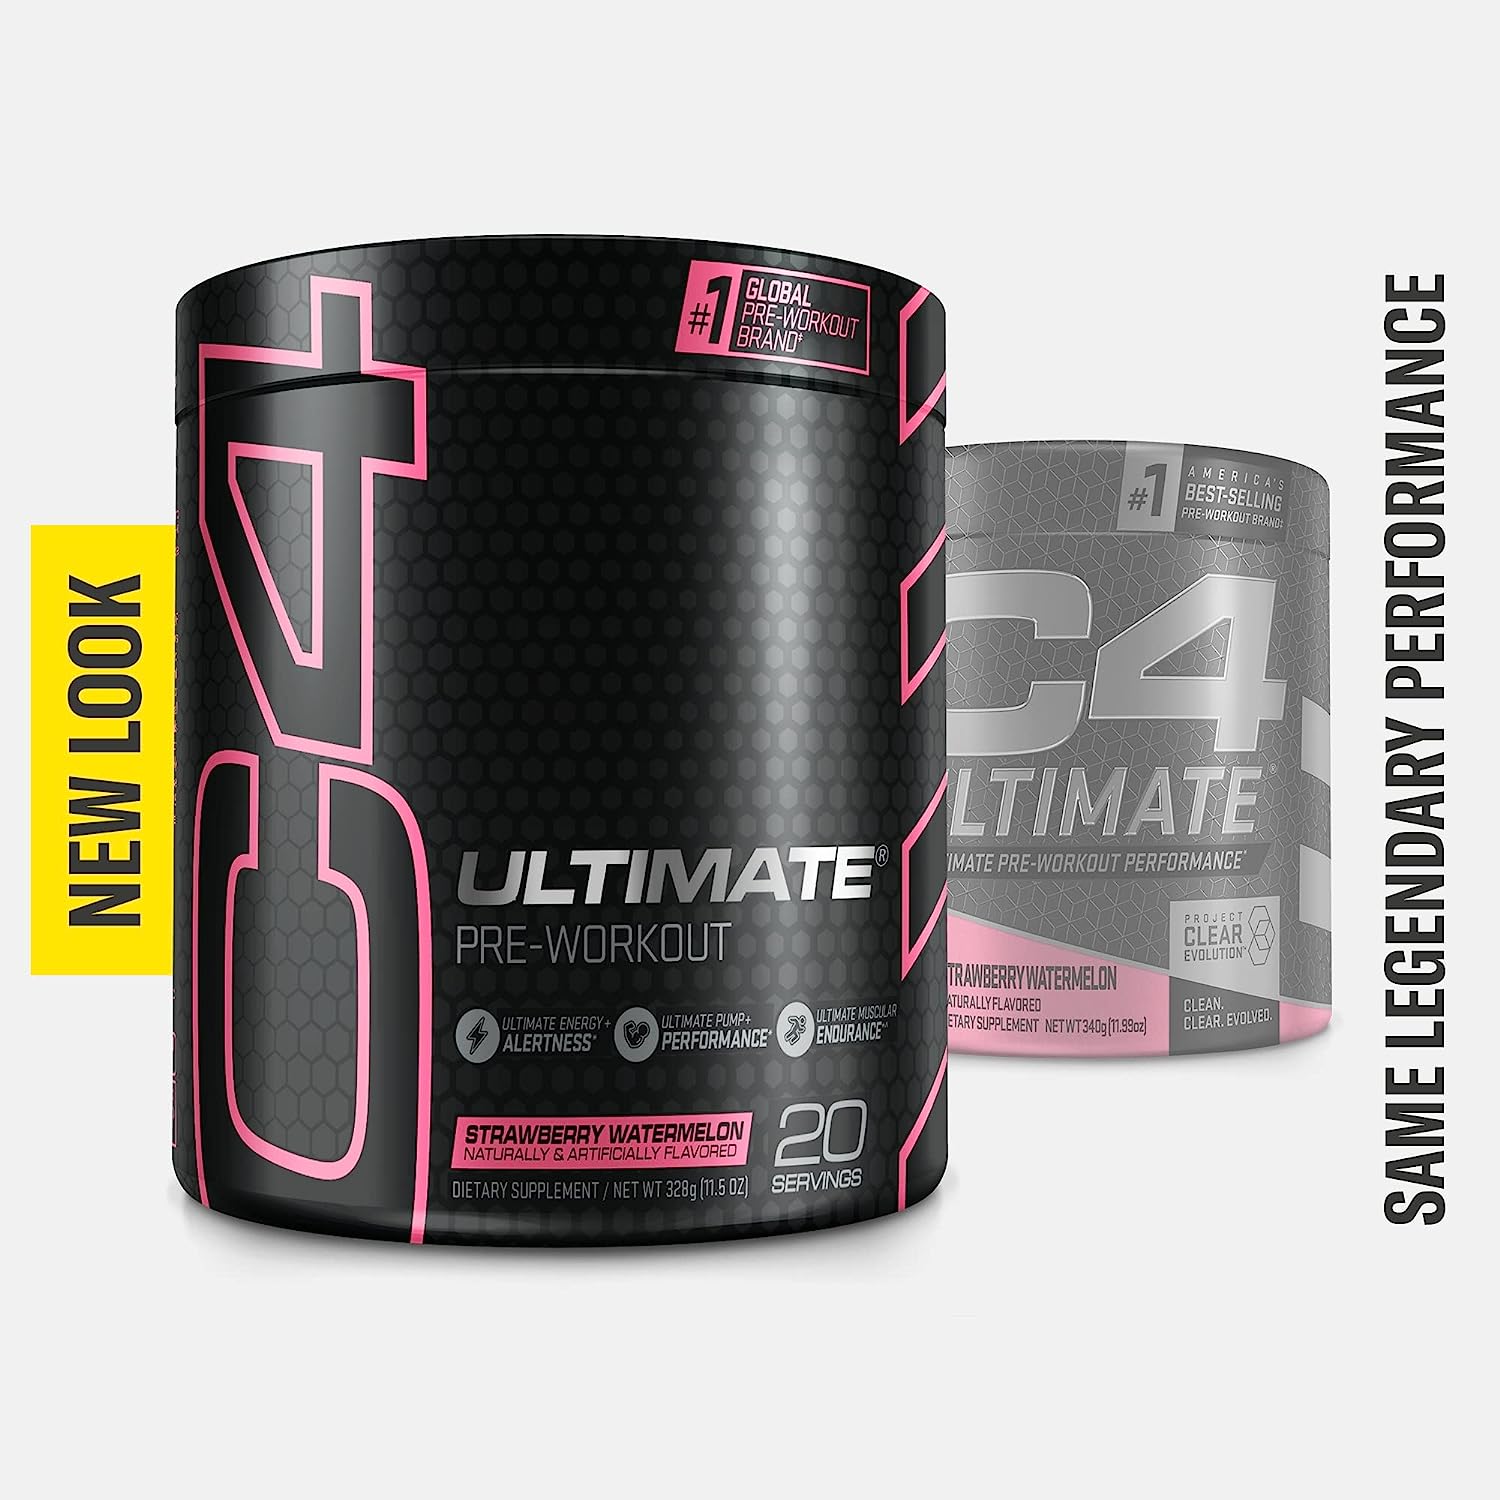 Cellucor C4 Ultimate Pre Workout Powder Watermelon - Sugar Free Preworkout Energy Supplement for Men & Women - 300mg Caffeine + 3.2g Beta Alanine + 2 Patented Creatines - 20 Servings : Everything Else